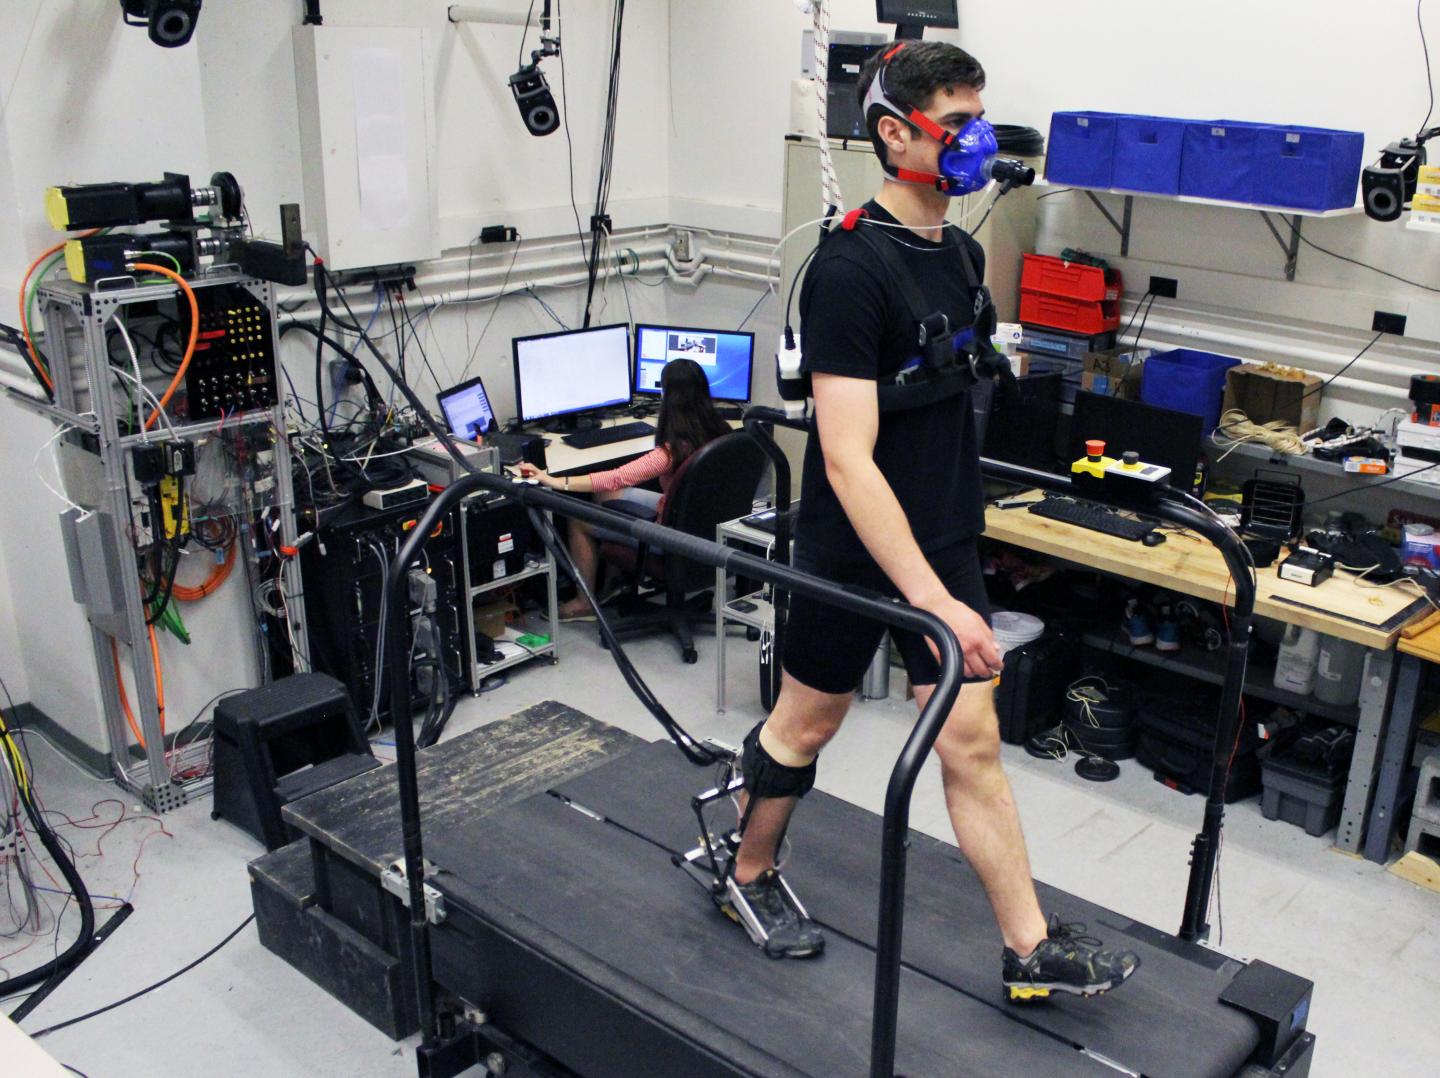 Personalized exoskeletons can enhance human abilities and aid rehabilitation